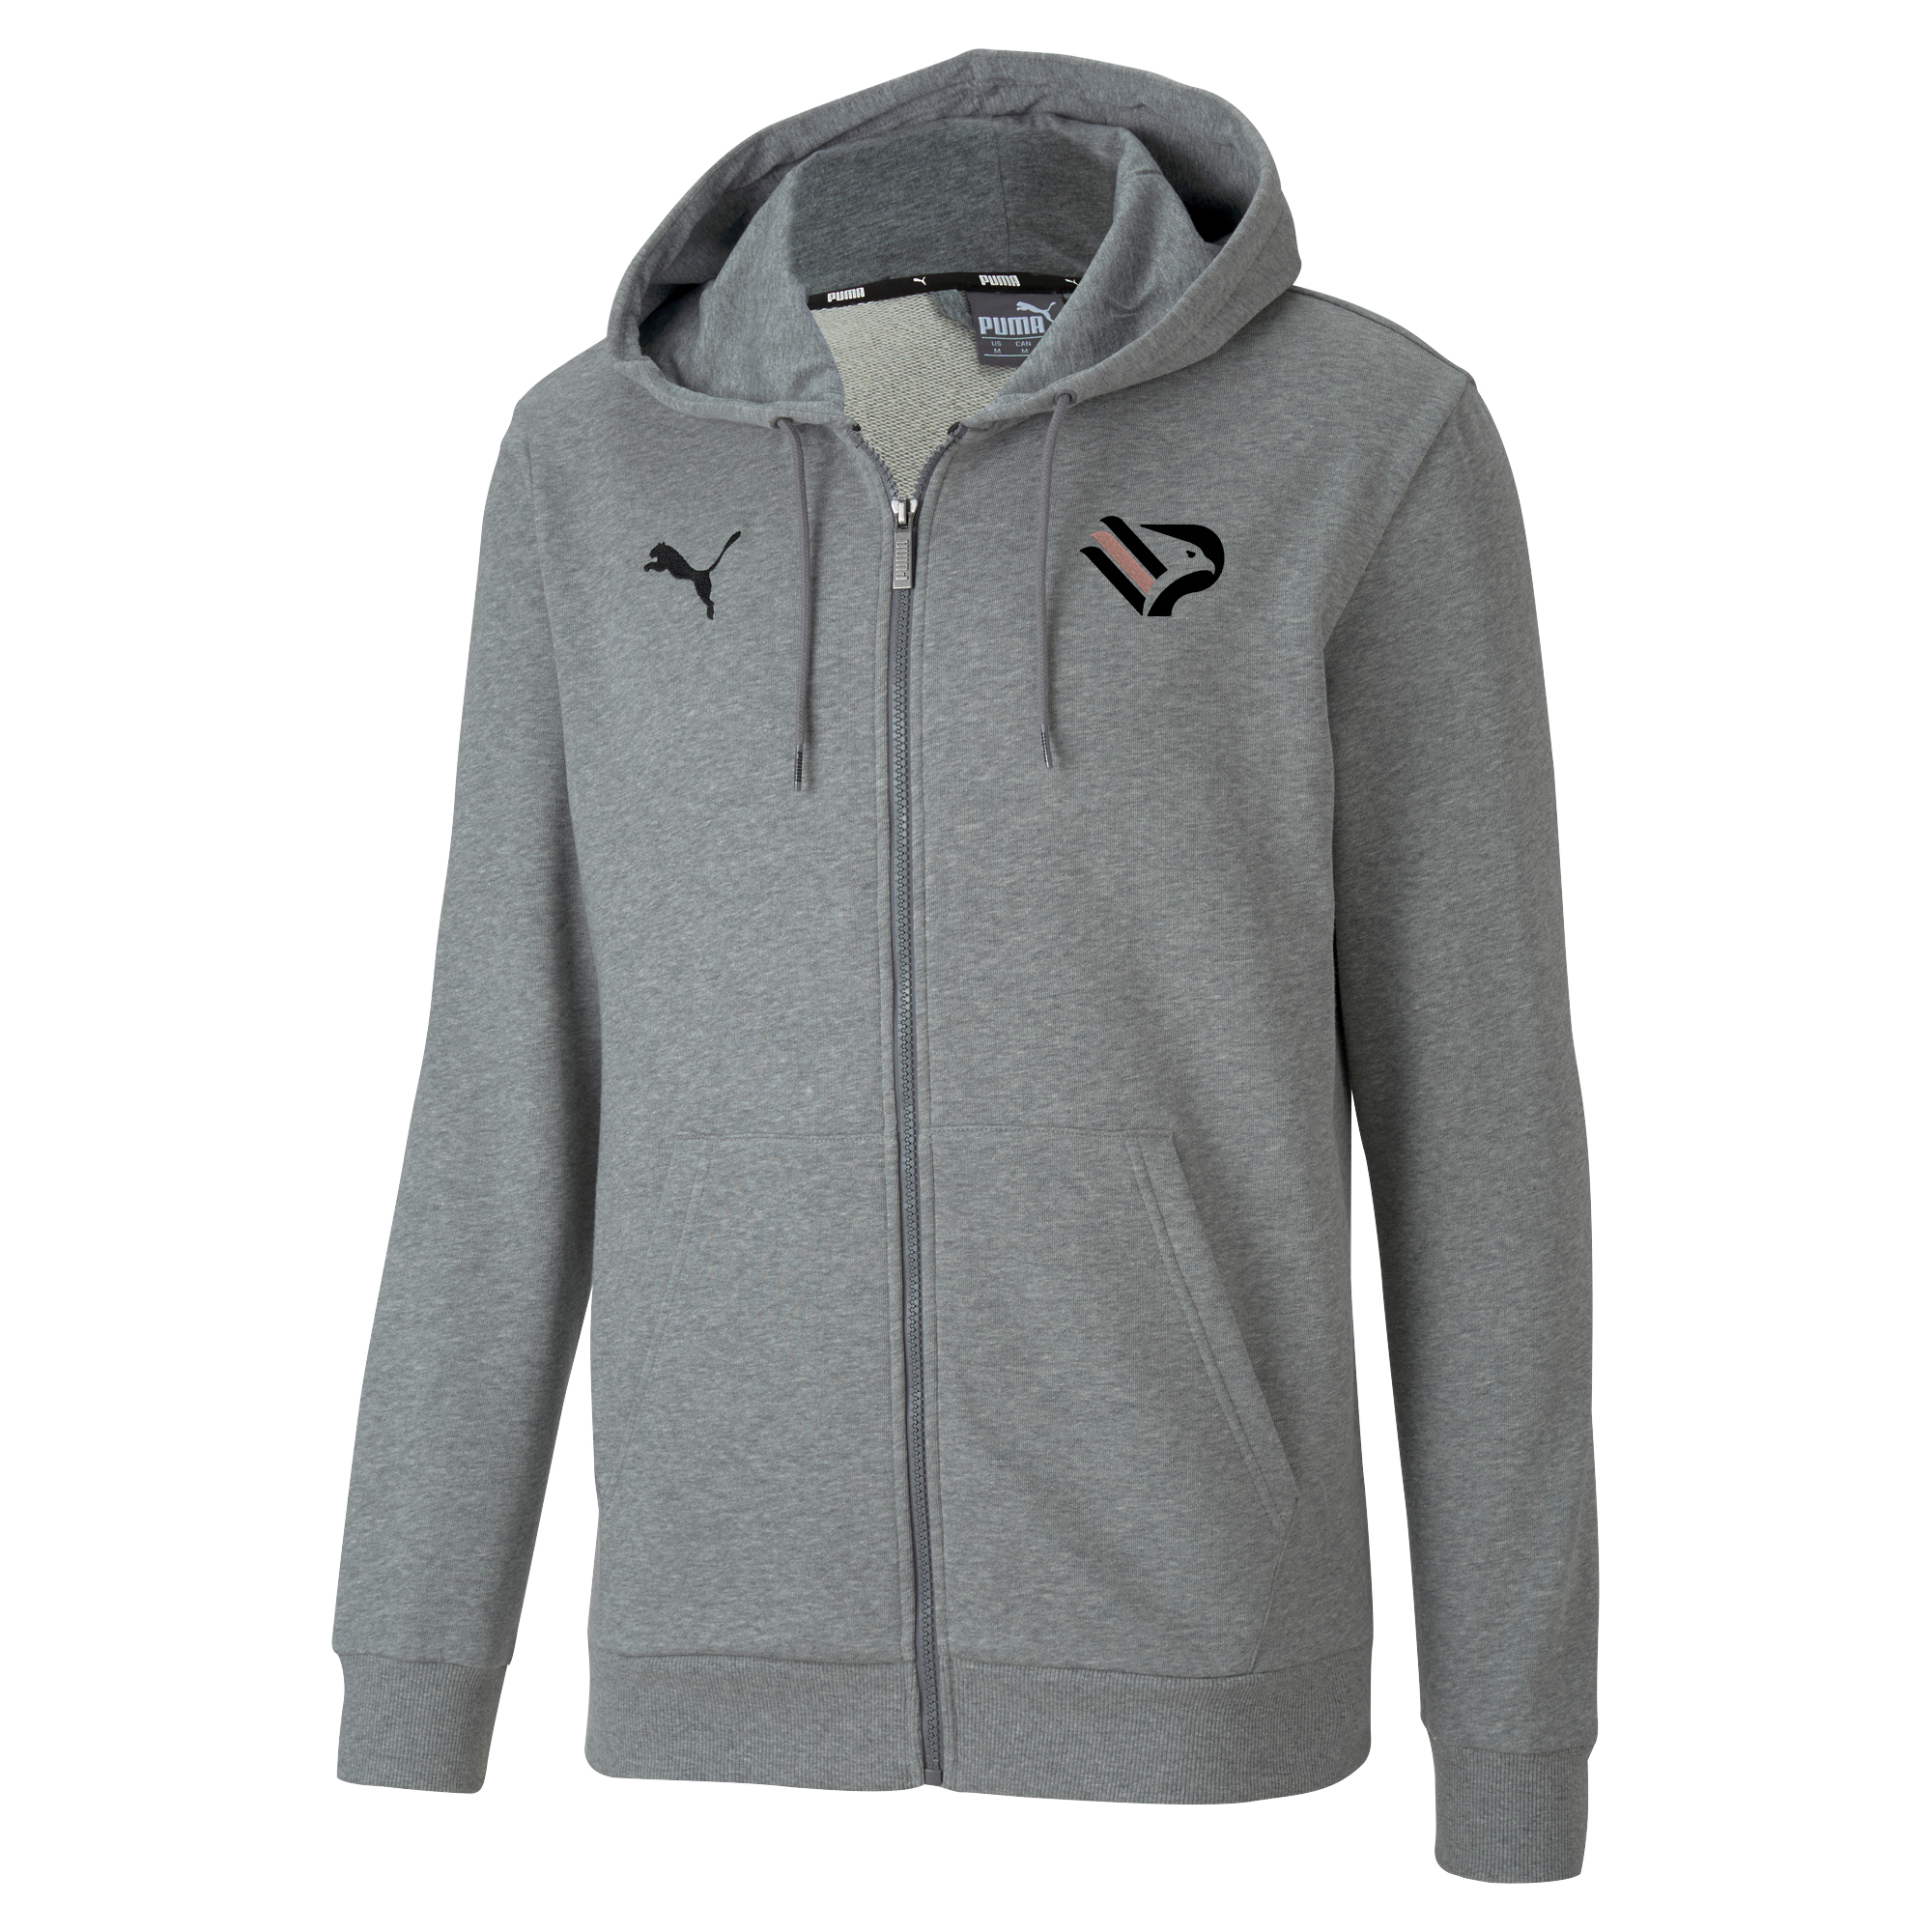 Sweater Team Grey - Palermo F.C. Official Store